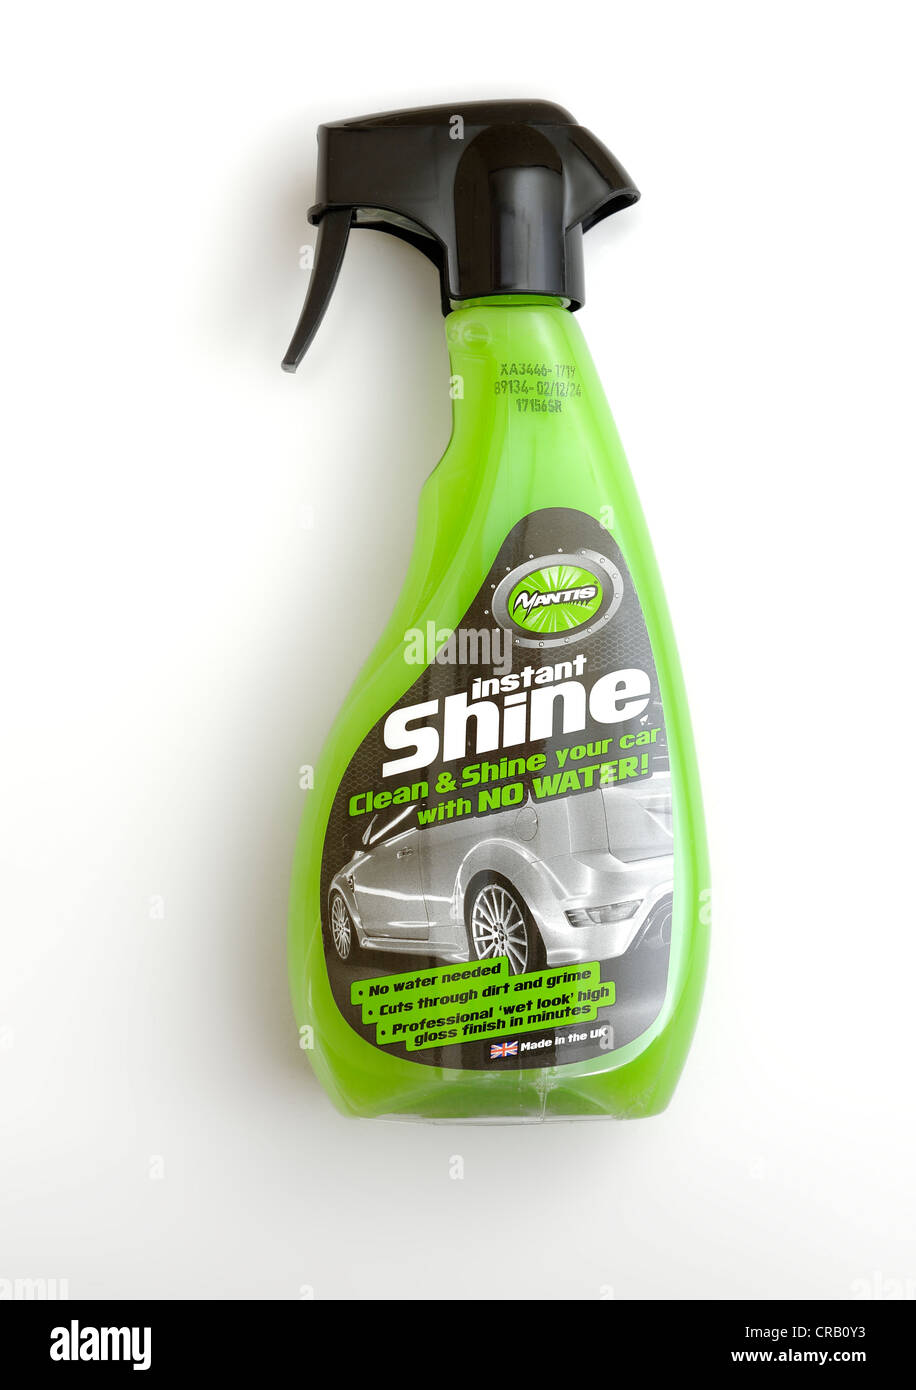 jml mantis instant car shine wash your car without water Stock Photo